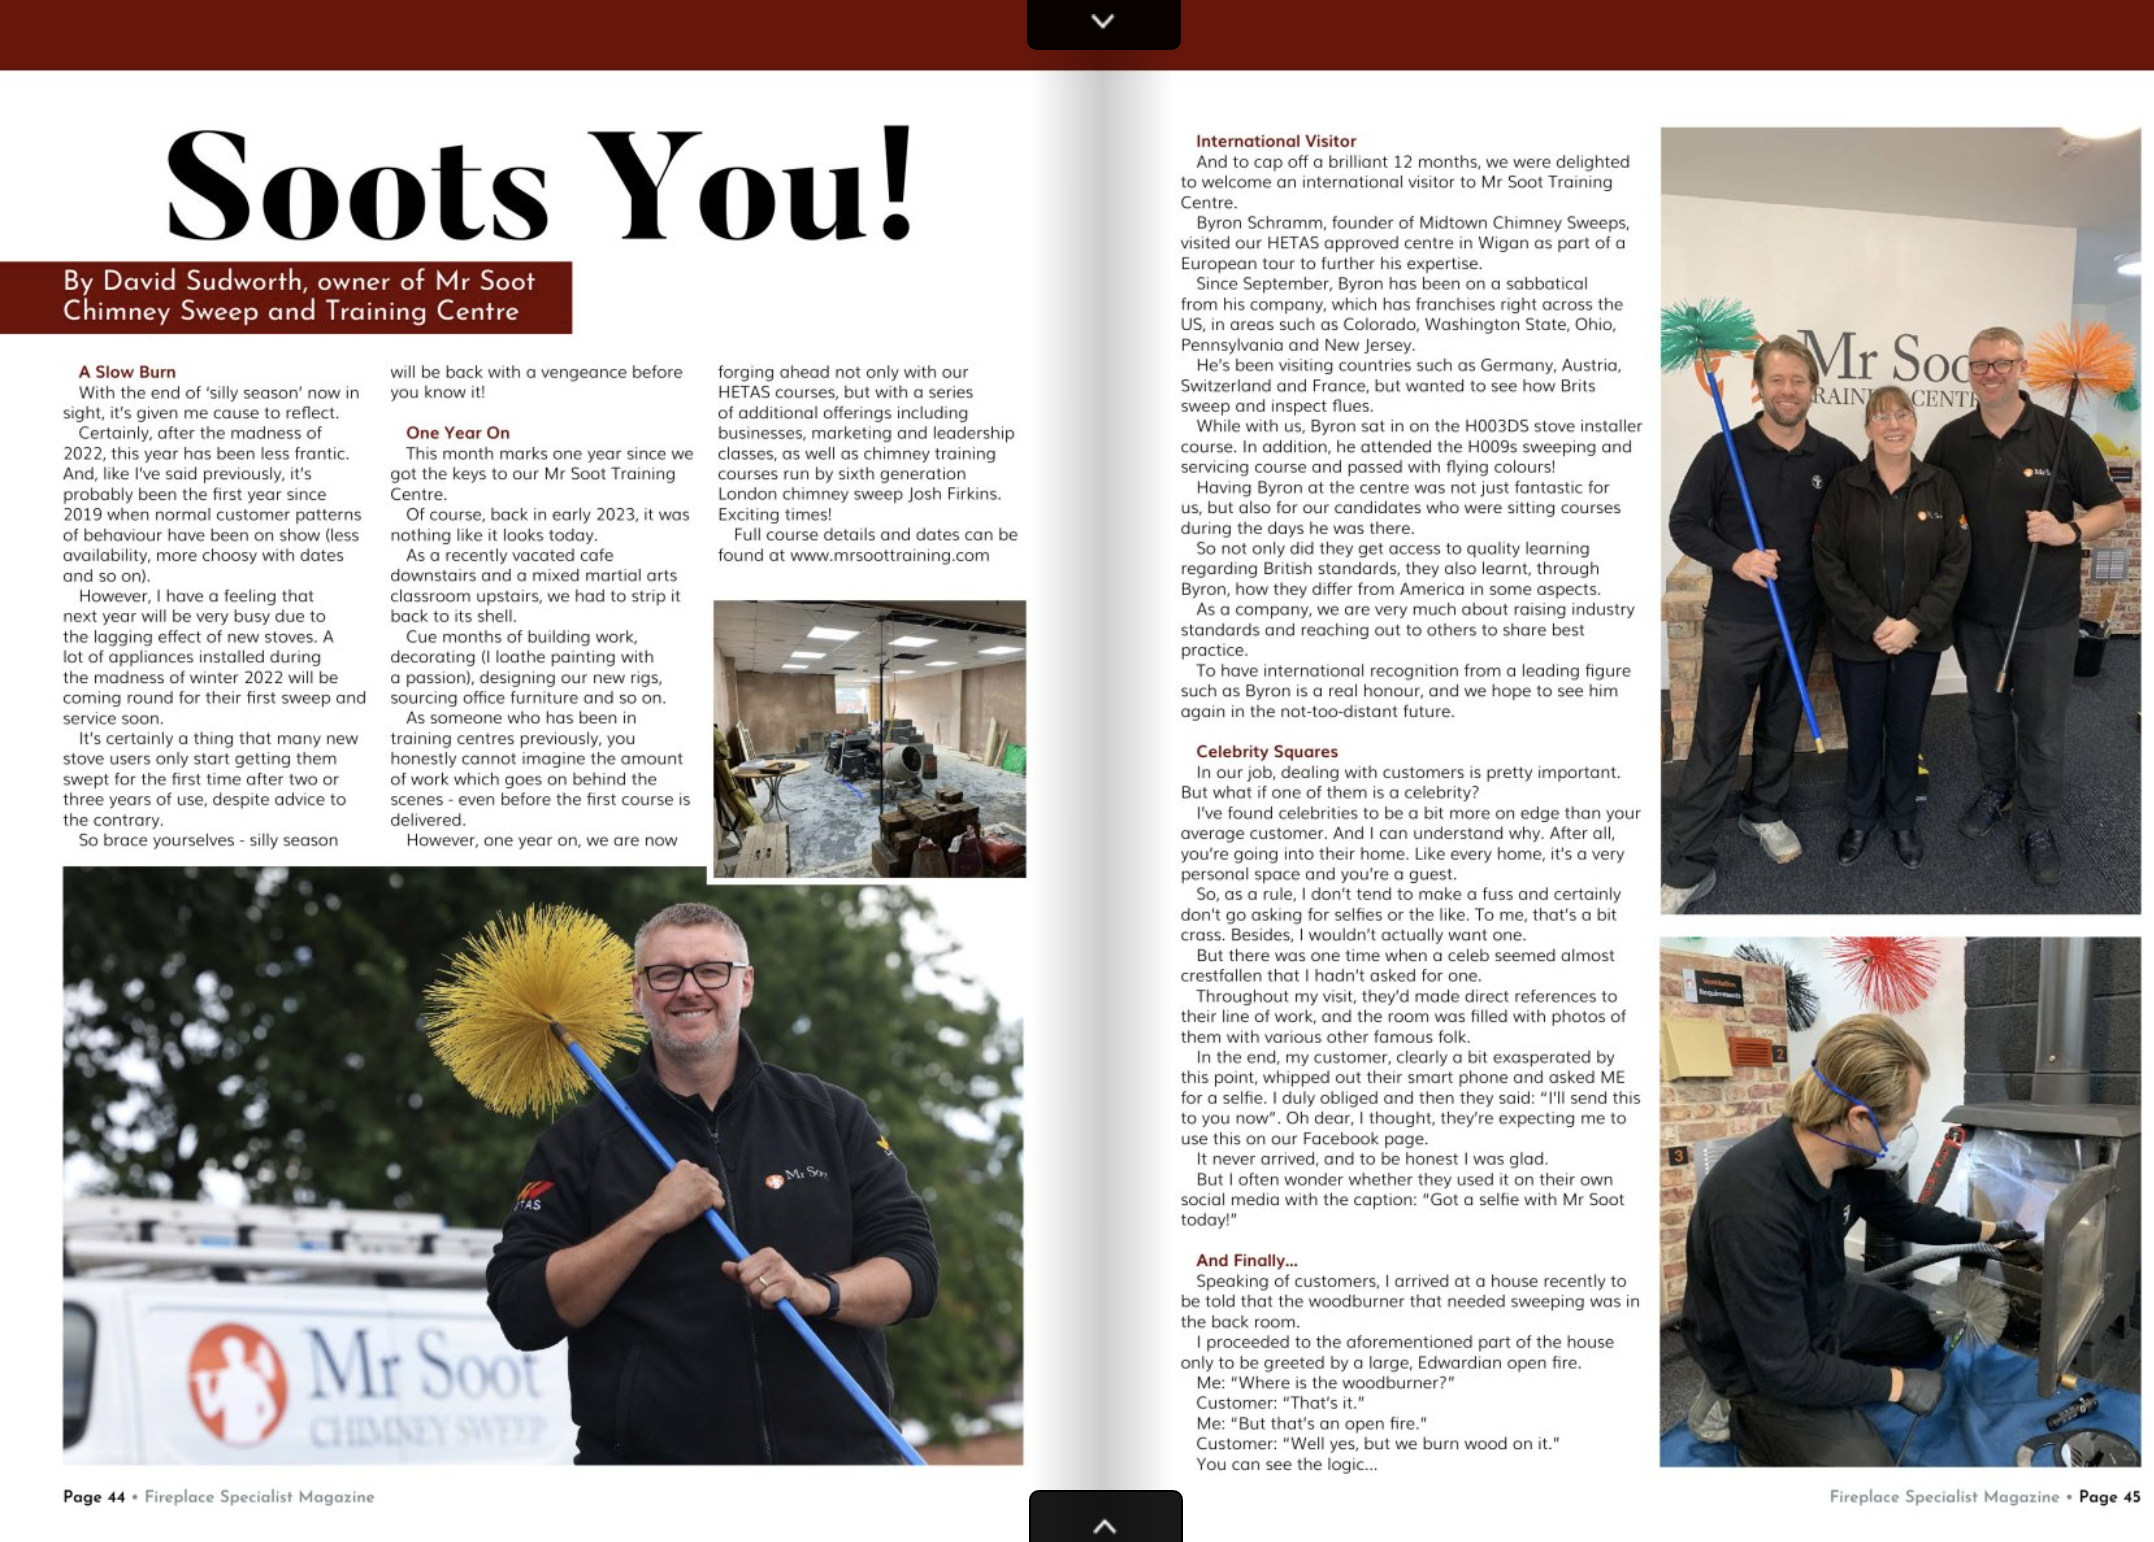 A Visit to the Mr. Soot Training Centre in Wigan, England | Feature in Fireplace Specialist Magazine